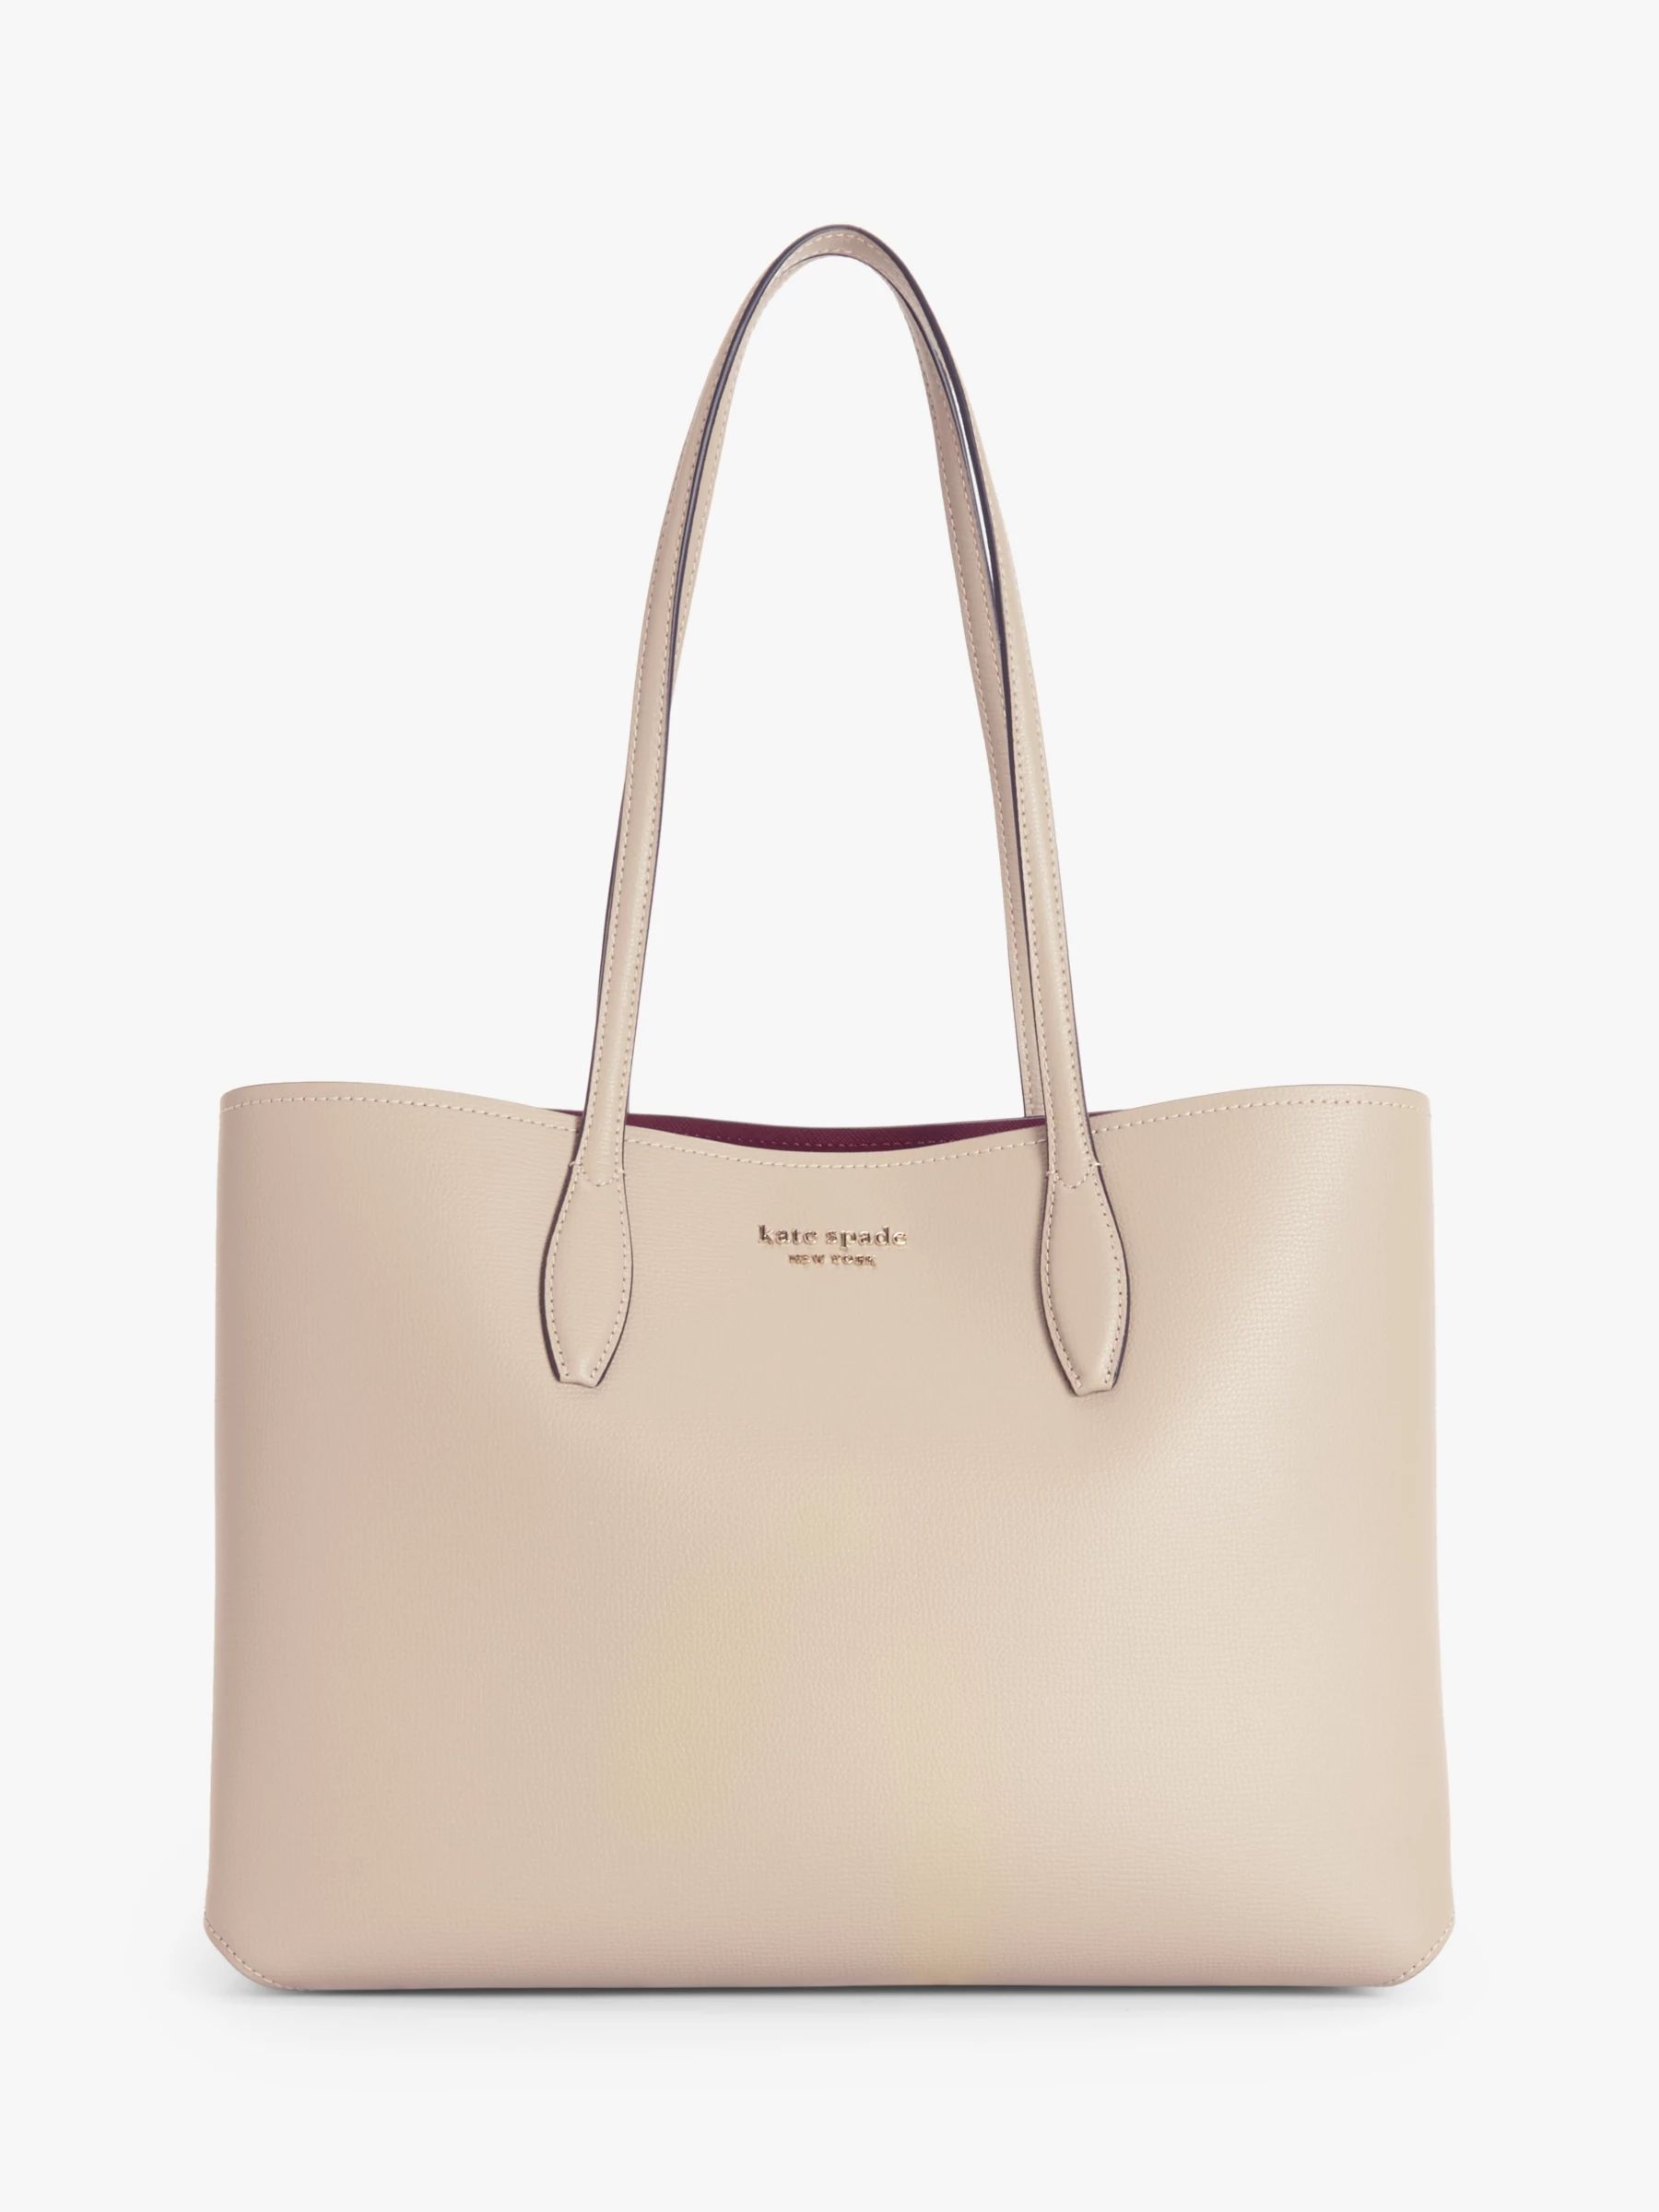 kate spade new york All Day Leather Large Tote Bag, Timeless Taupe | John Lewis (UK)